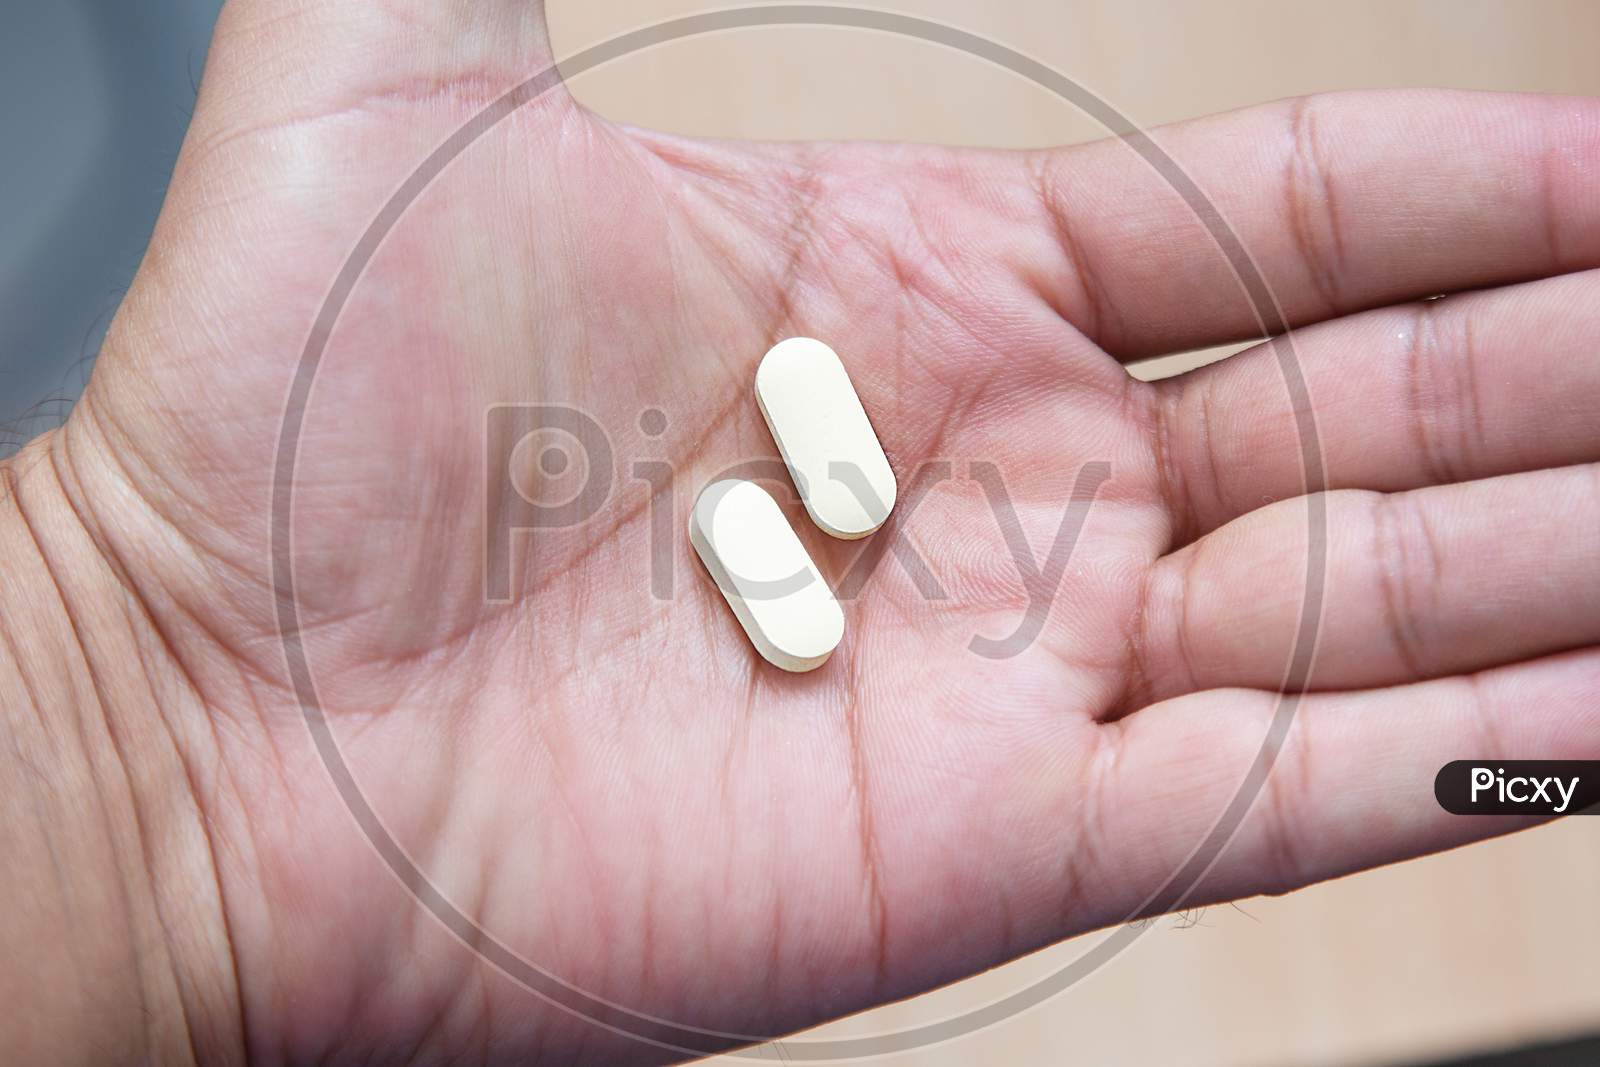 Hydroxychloroquine Tablet Medication For Treatment Malaria, And Potential New Drug Cure For Covid 19 Corona Virus Closeup. Therapy For Coronavirus. Pharmaceuticals On Wooden Table. Tablet In Hand.